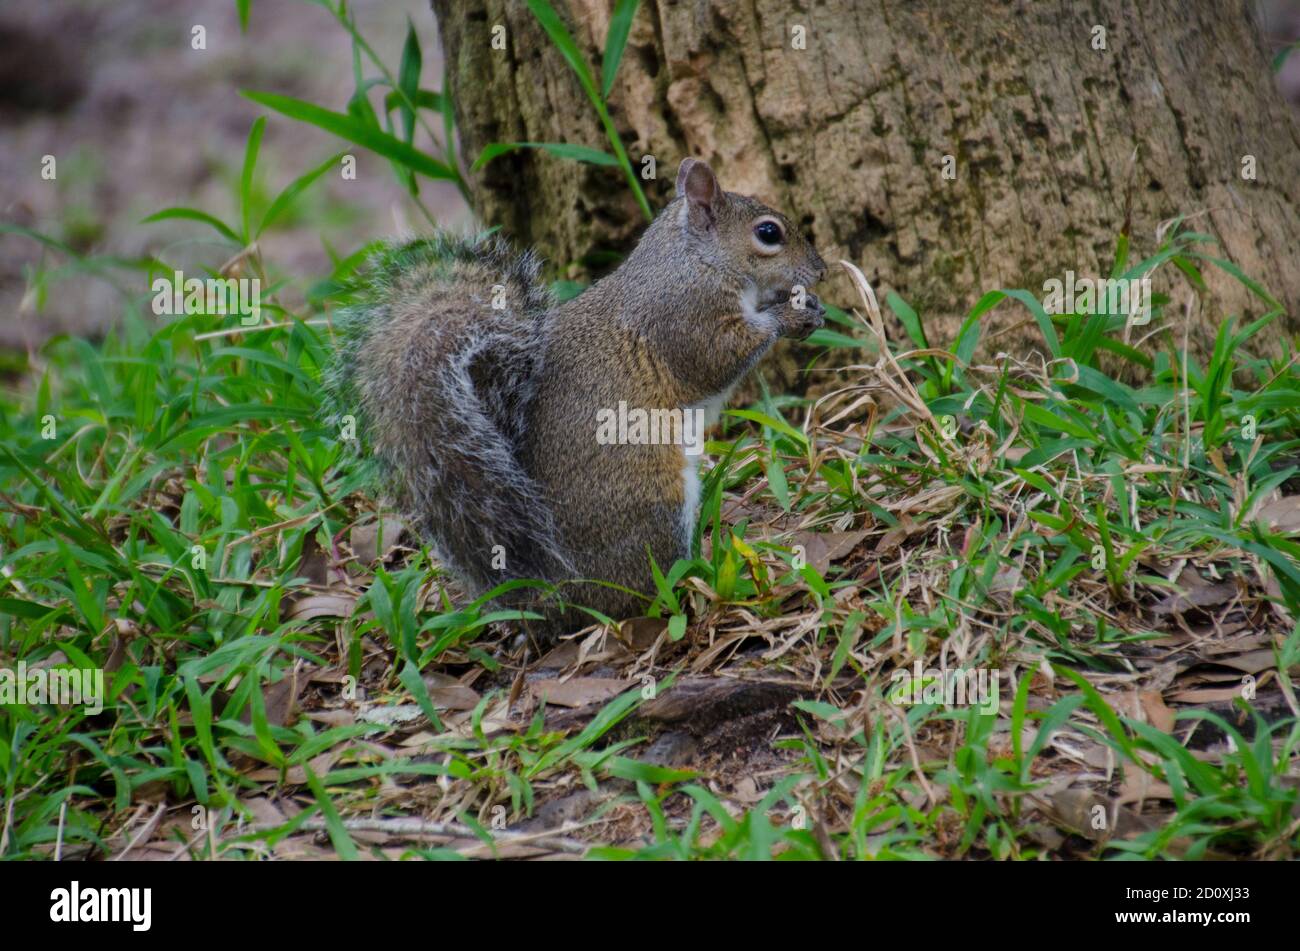 Gray squirrel standing on forest floor eating next to tree, side view,  Maine, USA Stock Photo